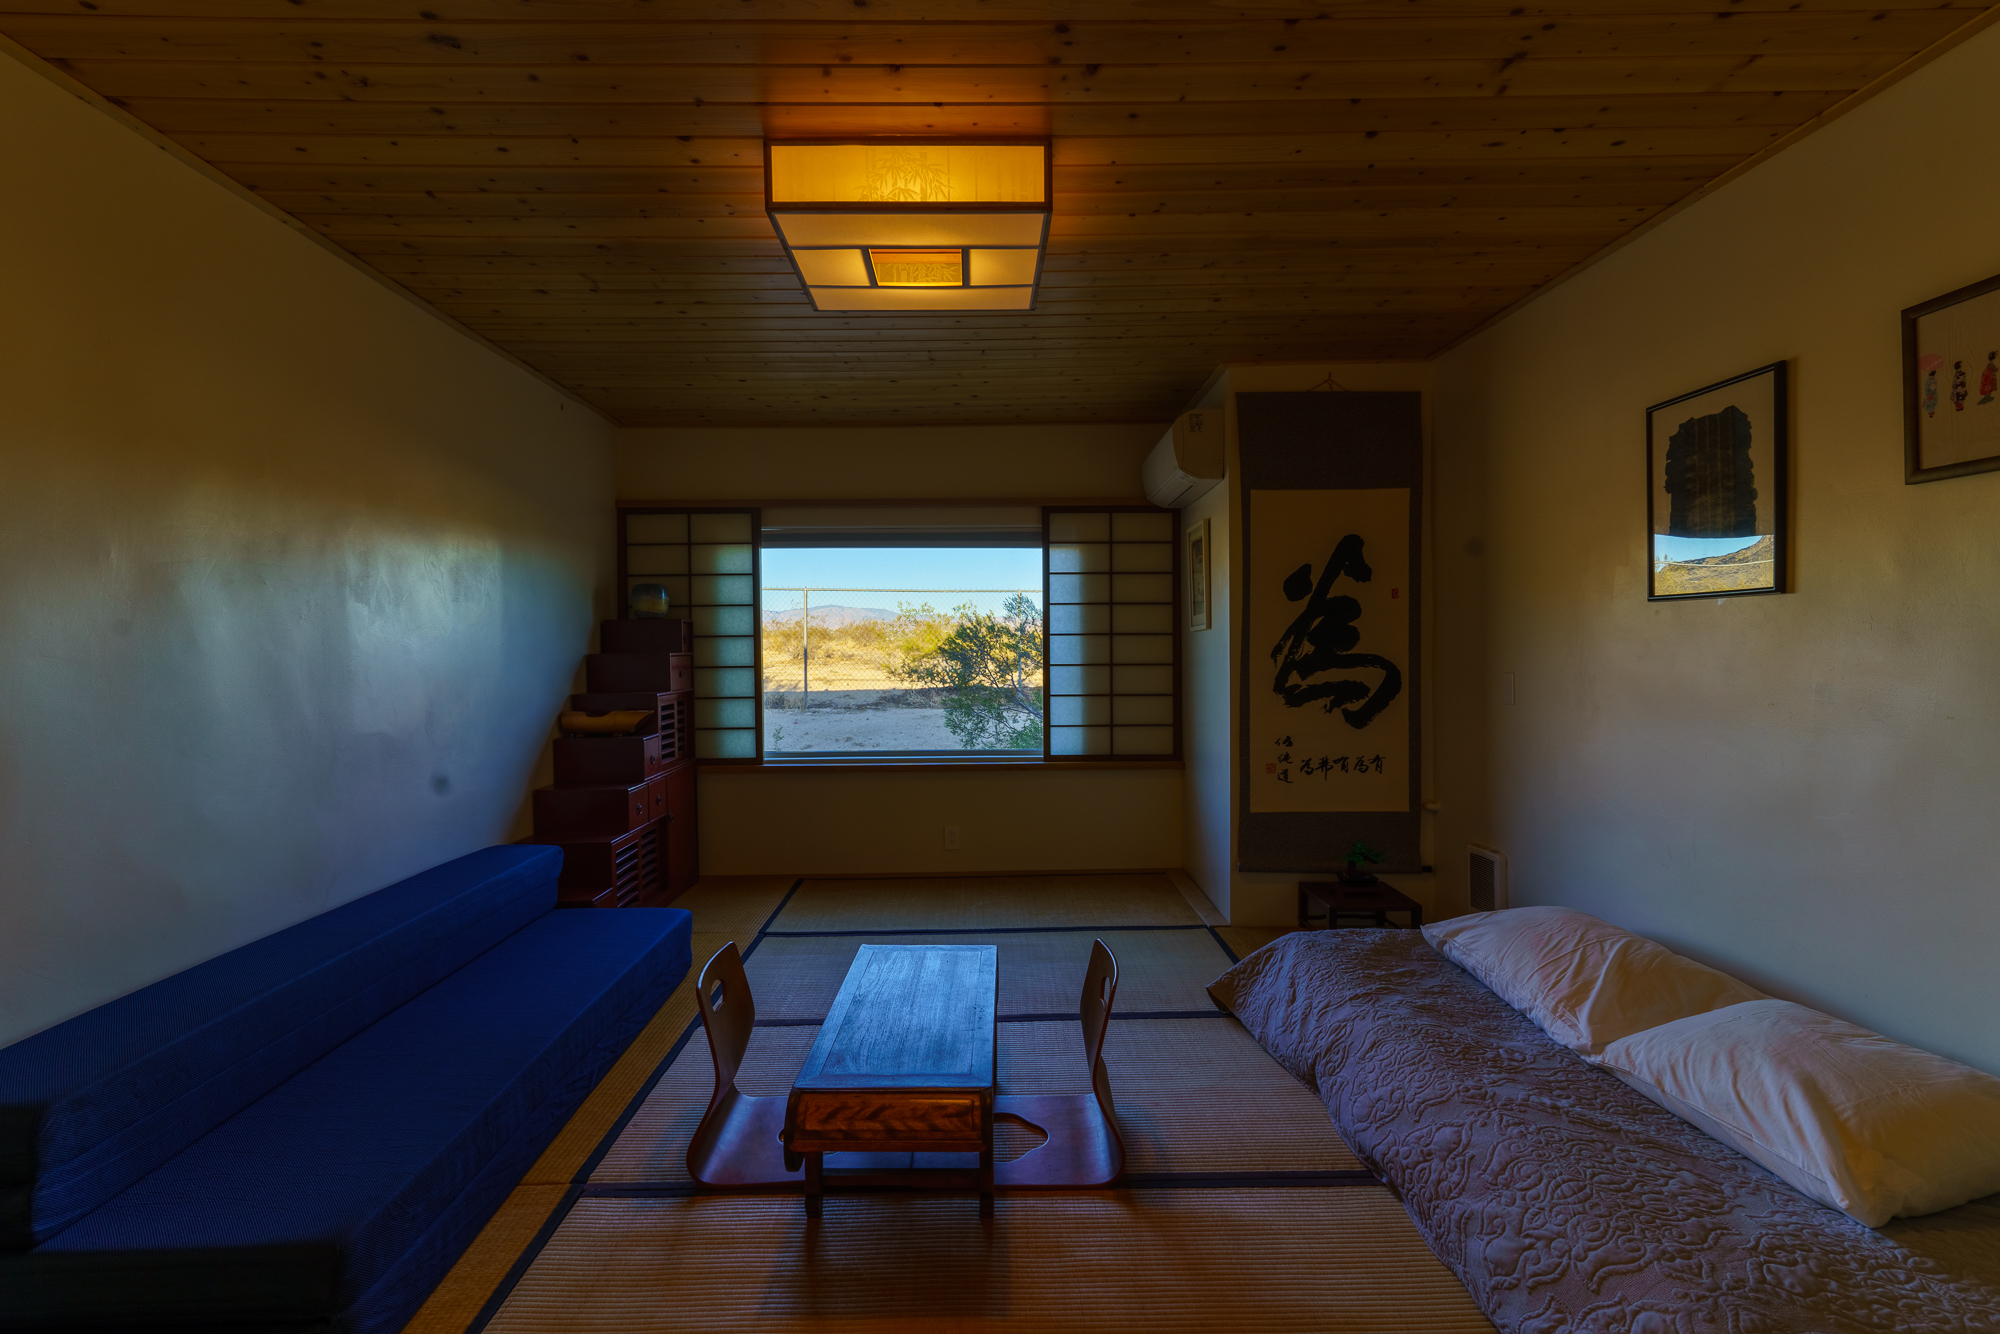 A room with tatami mat flooring, futons, and Japanese style wall decorations with evening lighting.